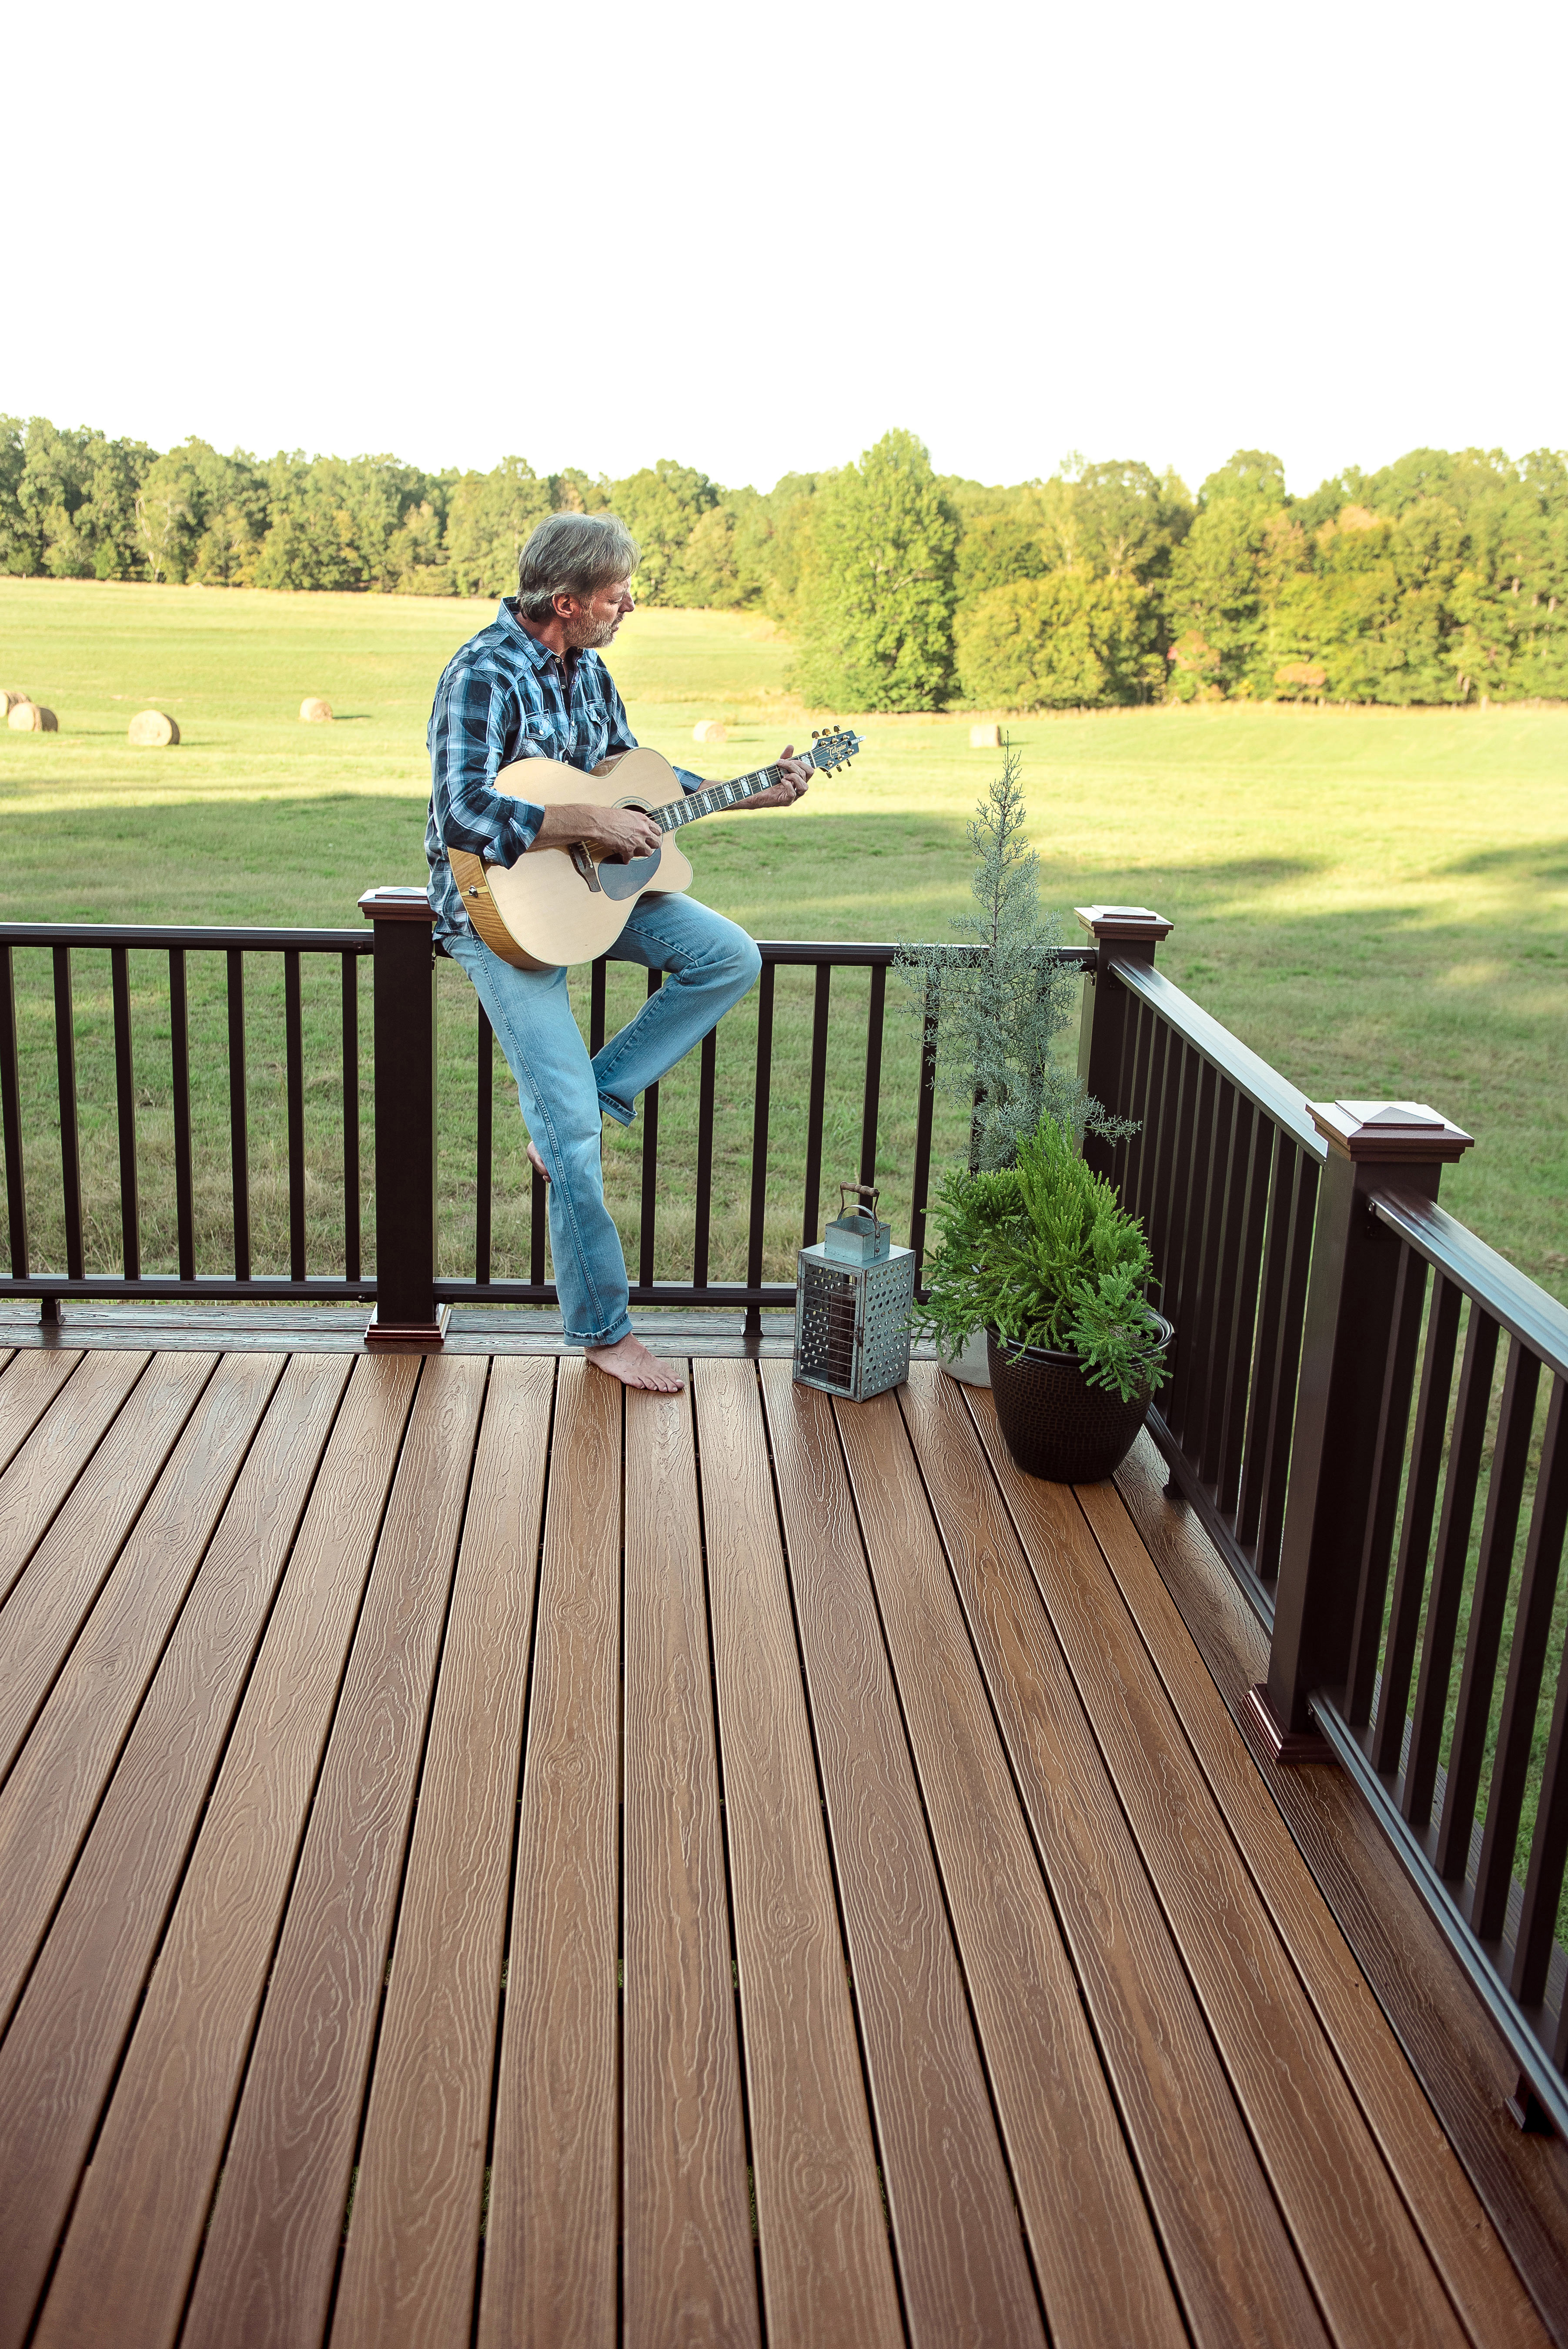 American musical artist Darryl Worley plays the guitar on his new Envision® deck accented with Marquee Railing®.